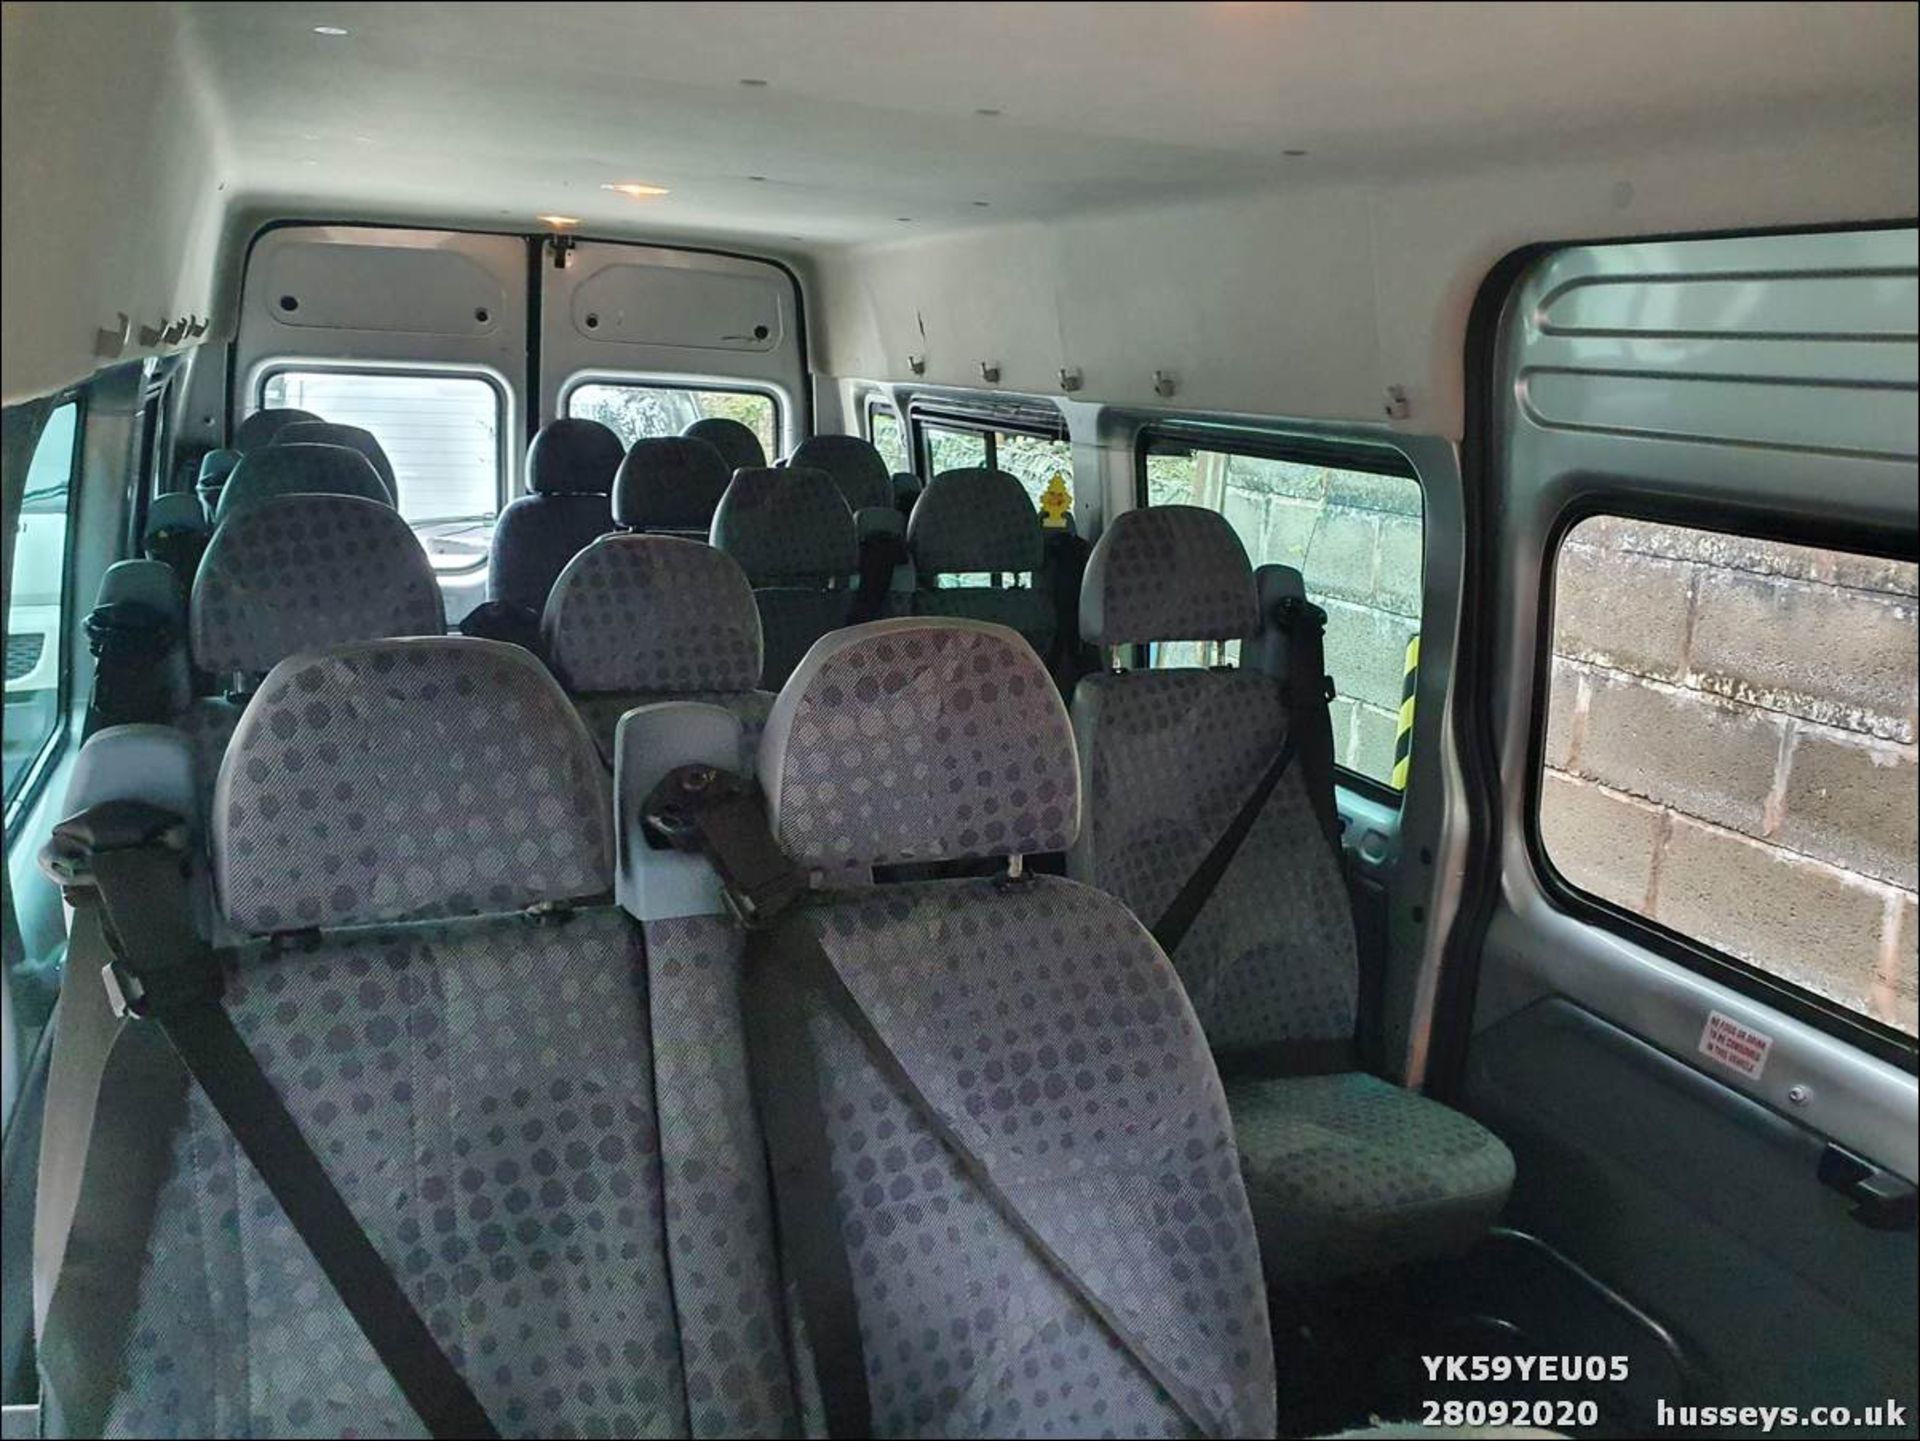 09/59 FORD TRANSIT 115 T430 17S RWD - 2402cc 5dr Minibus (Silver, 177k) - Image 5 of 9